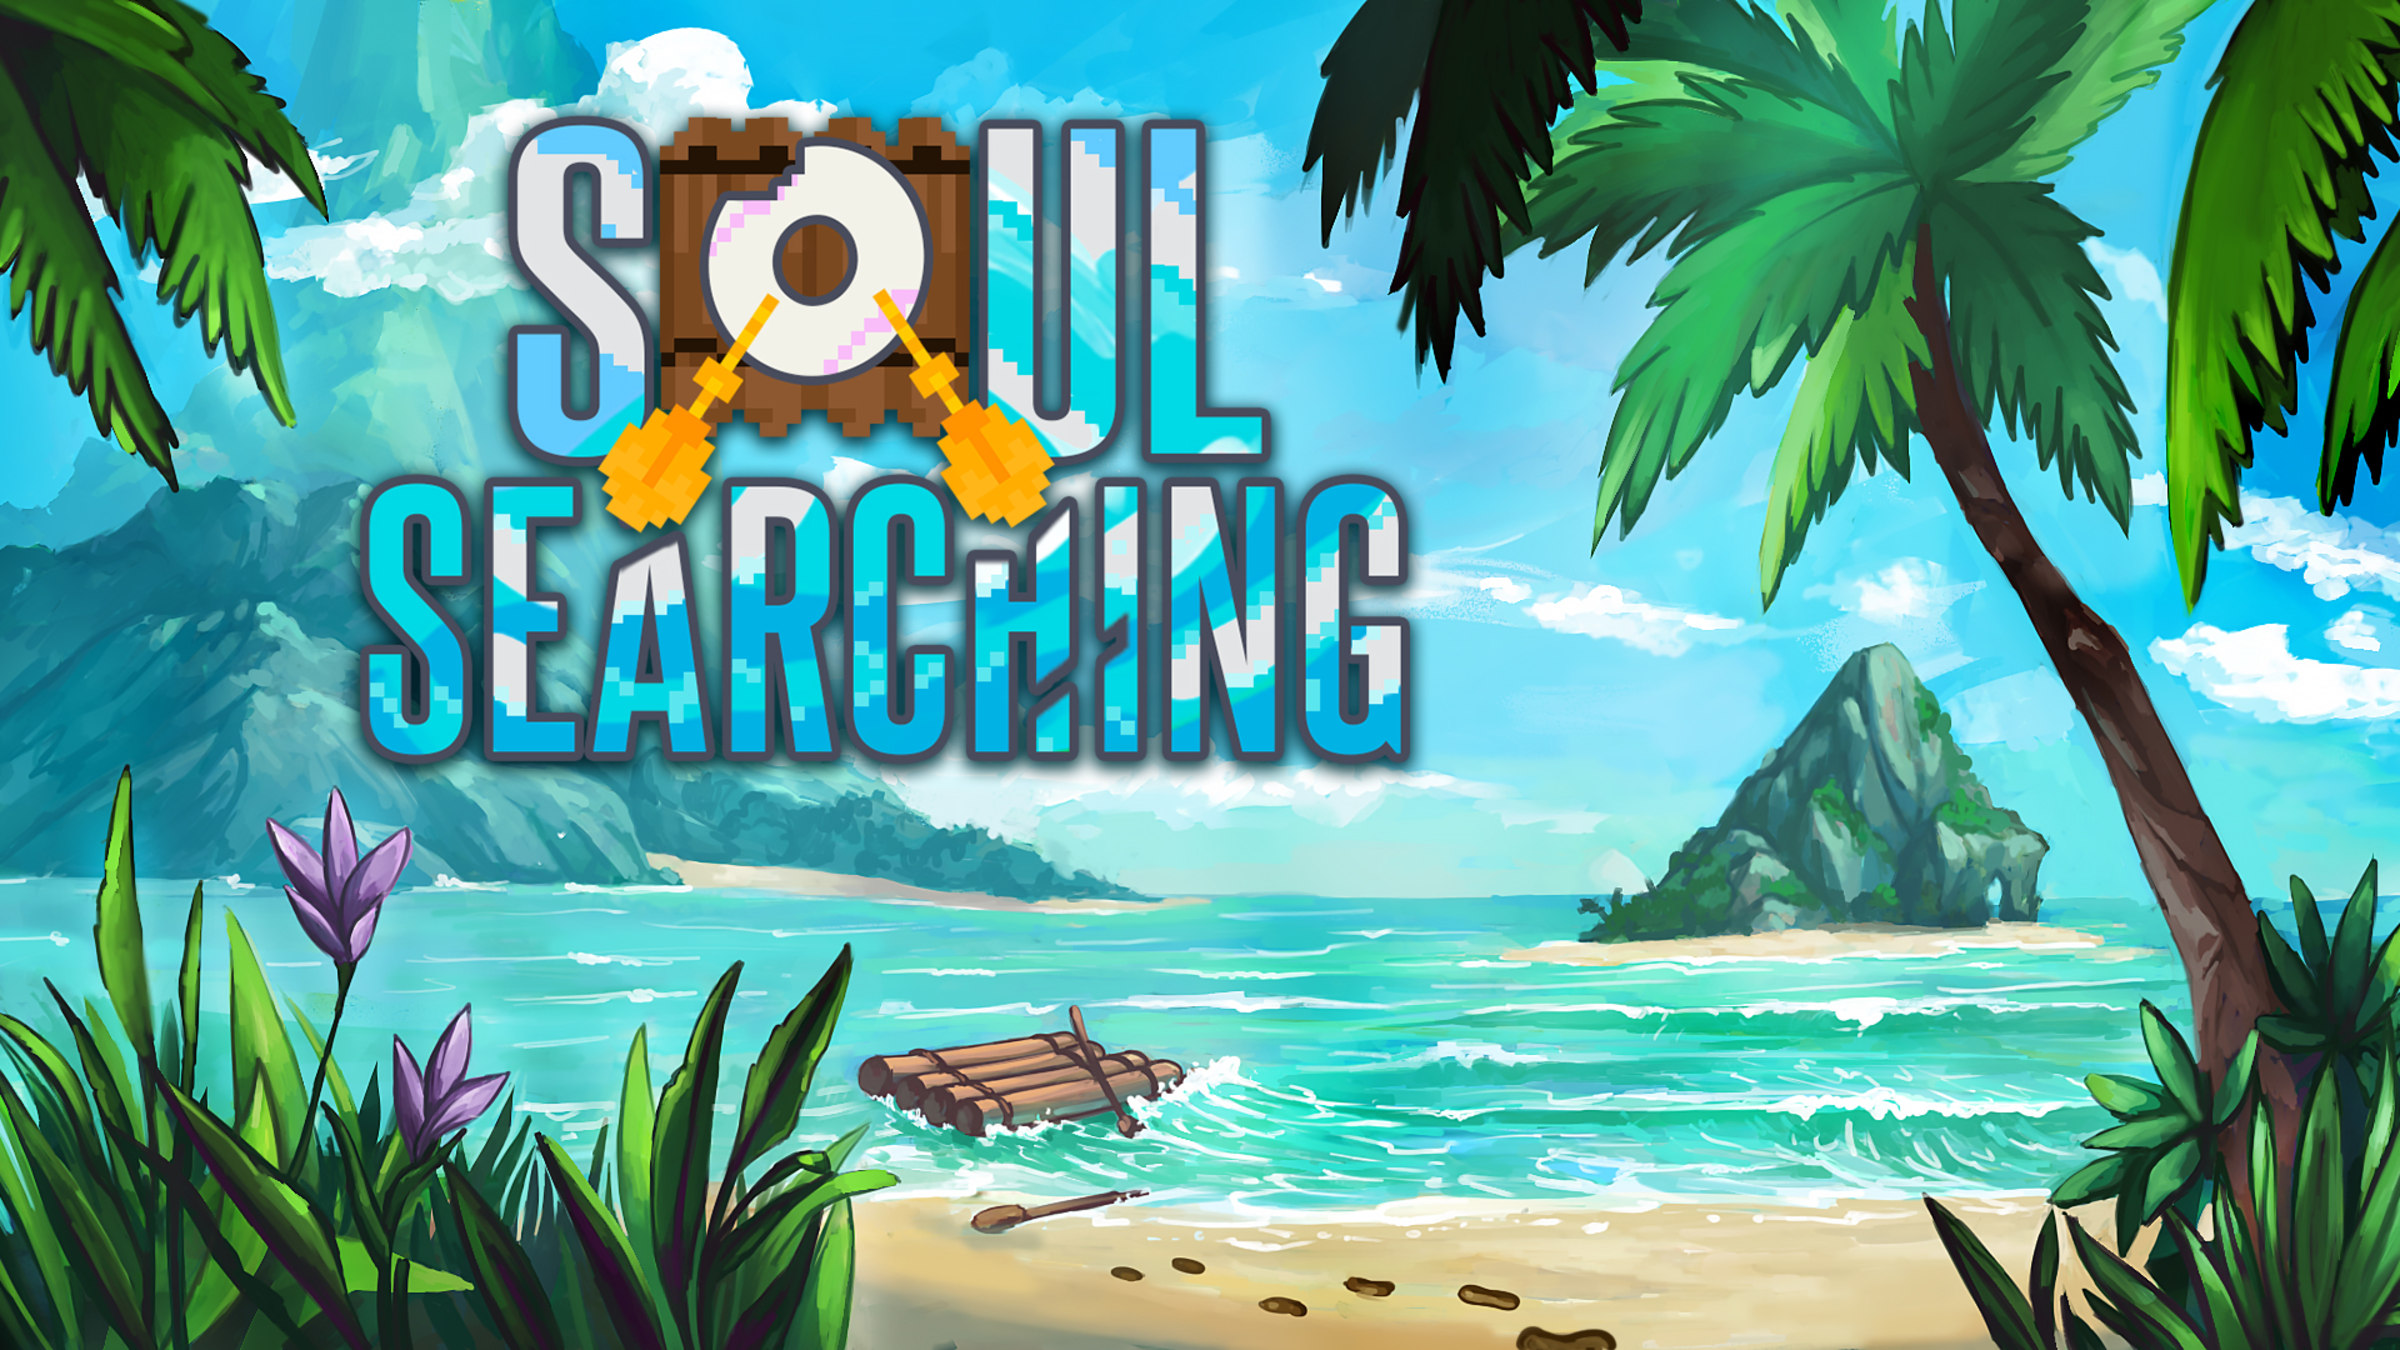 Soul Searching for Nintendo Switch - Nintendo Official Site